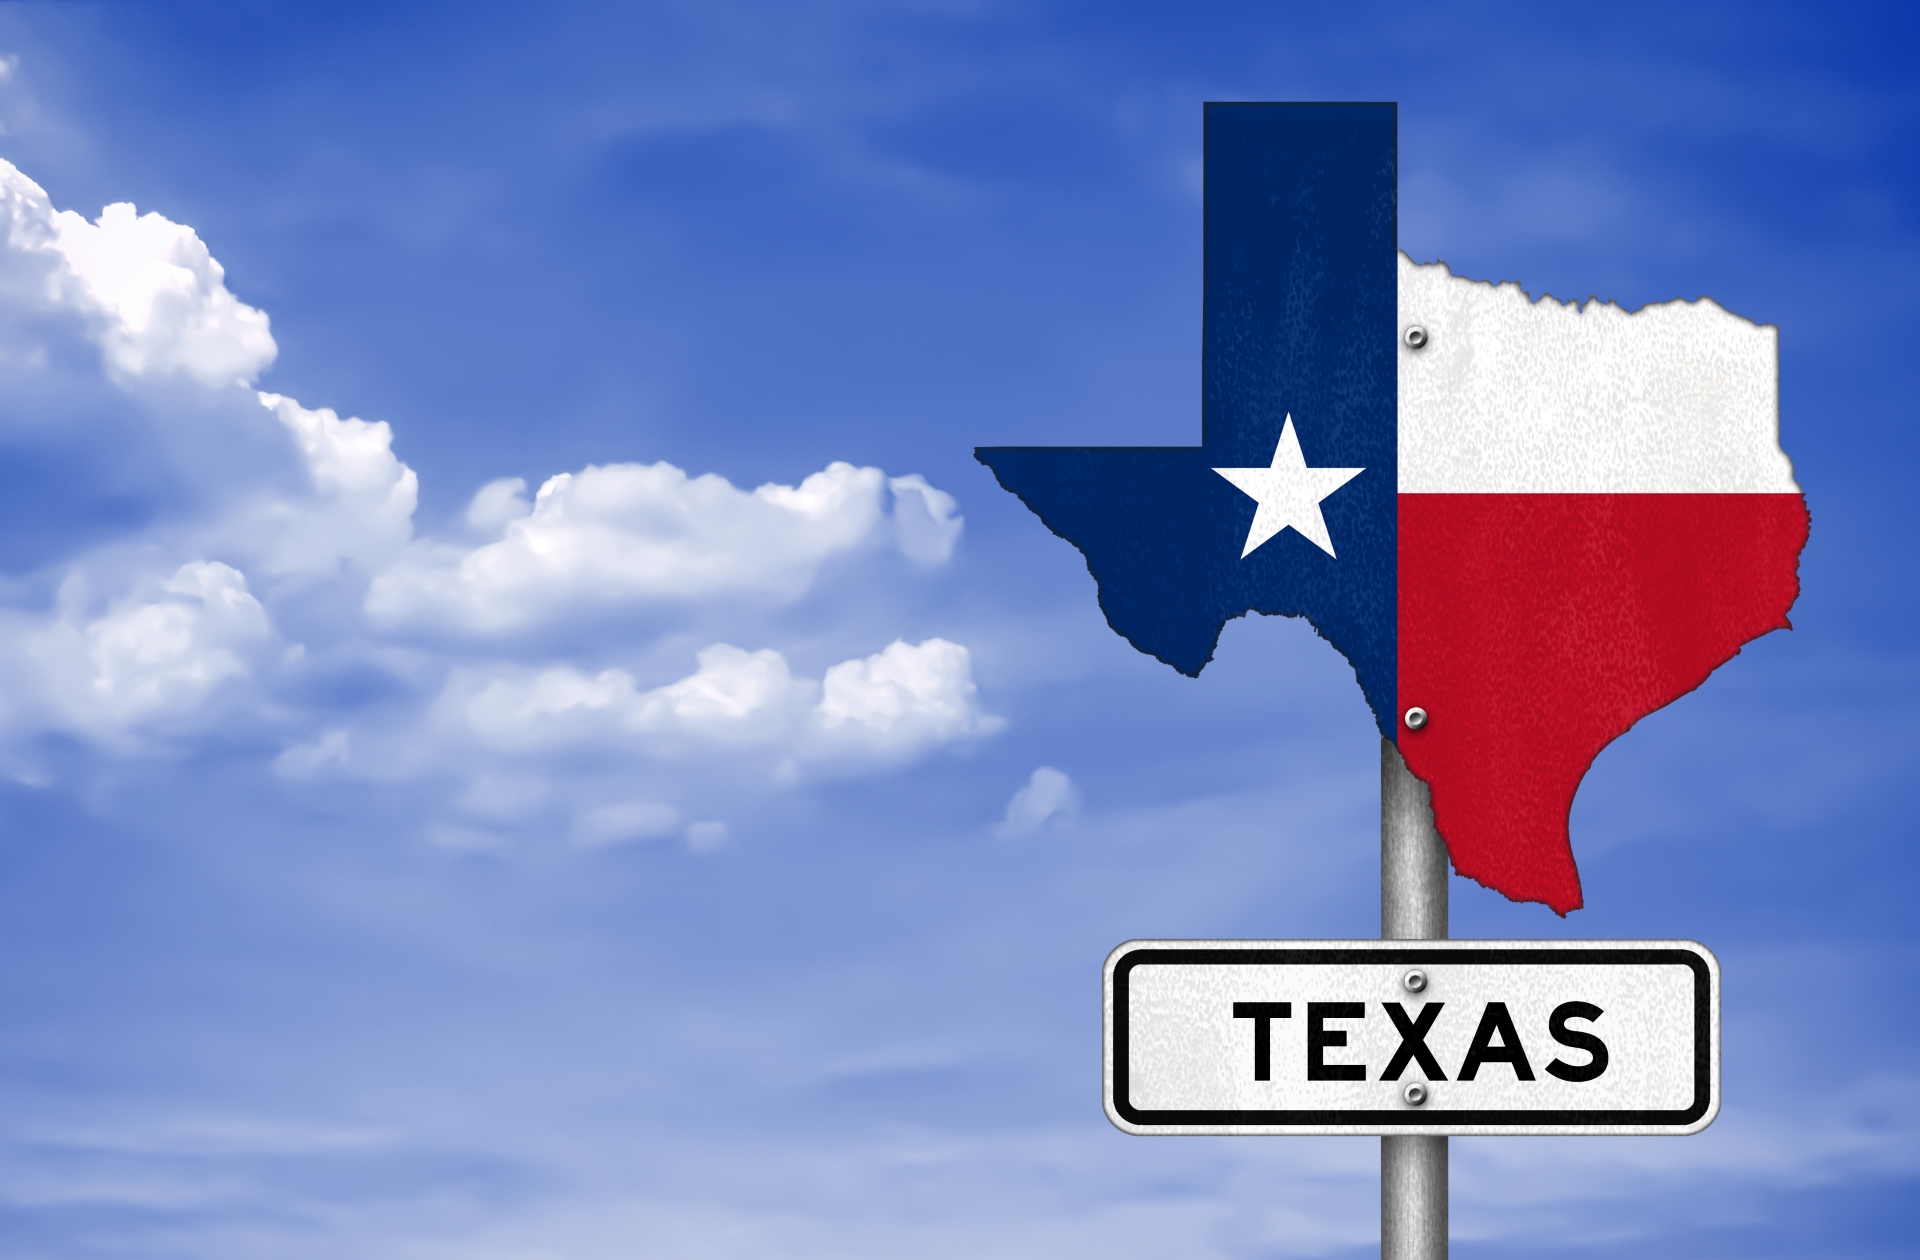 EACC Texas - Connect & Accelerate Your EU-US Relationships With Us.